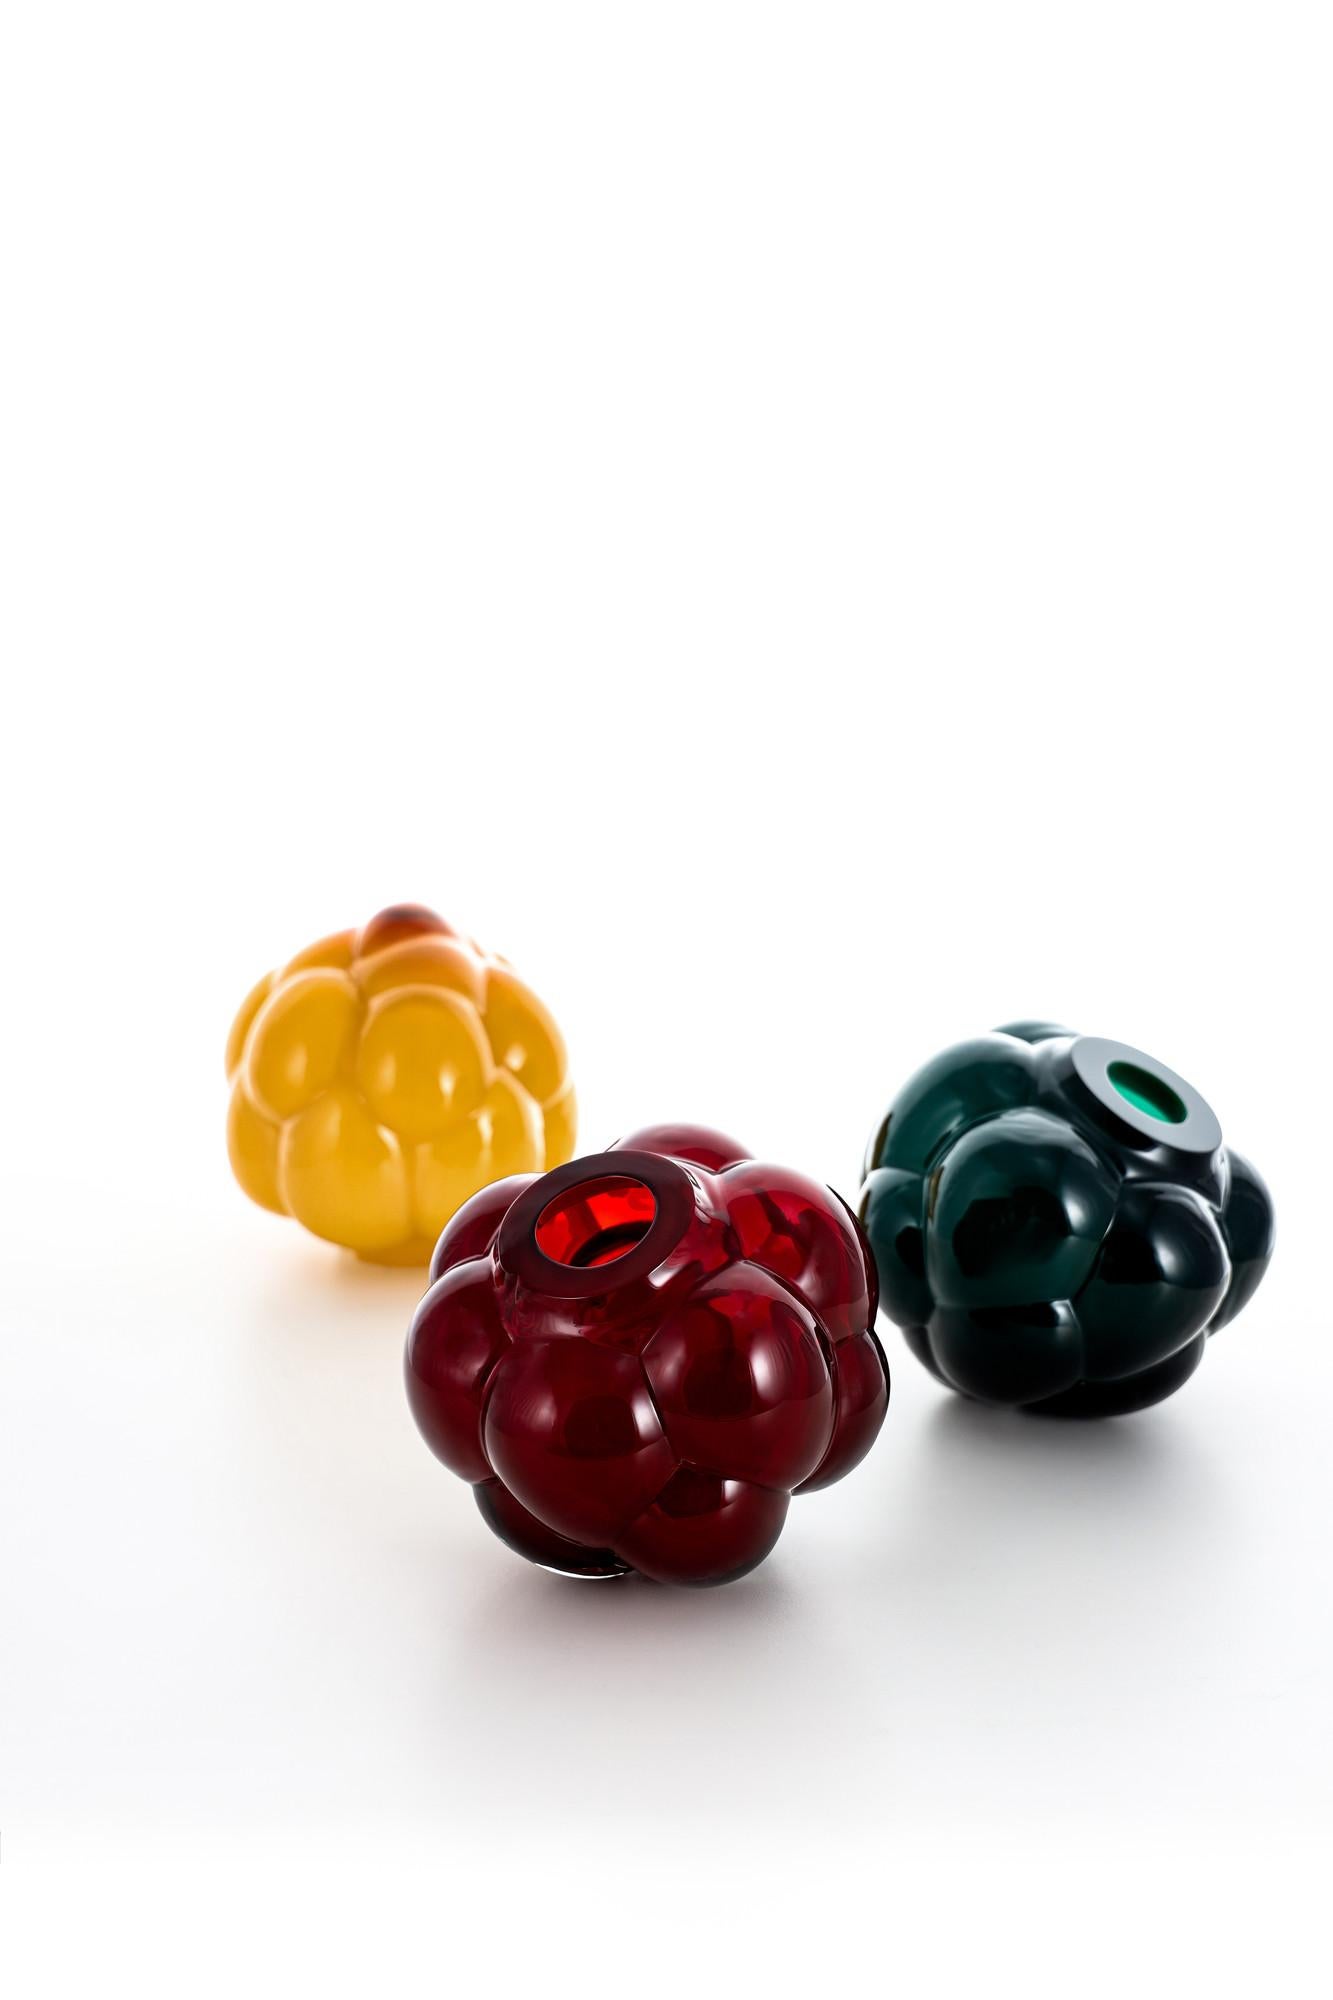 Ellen Ehk Åkesson is a Swedish glass artist who tells stories of the mysterious forest through her art glass, such as Berry Tales – a bubbling, bulbous berry plucked directly from the woodlands in her mind. The object in ruby red is handmade, with a